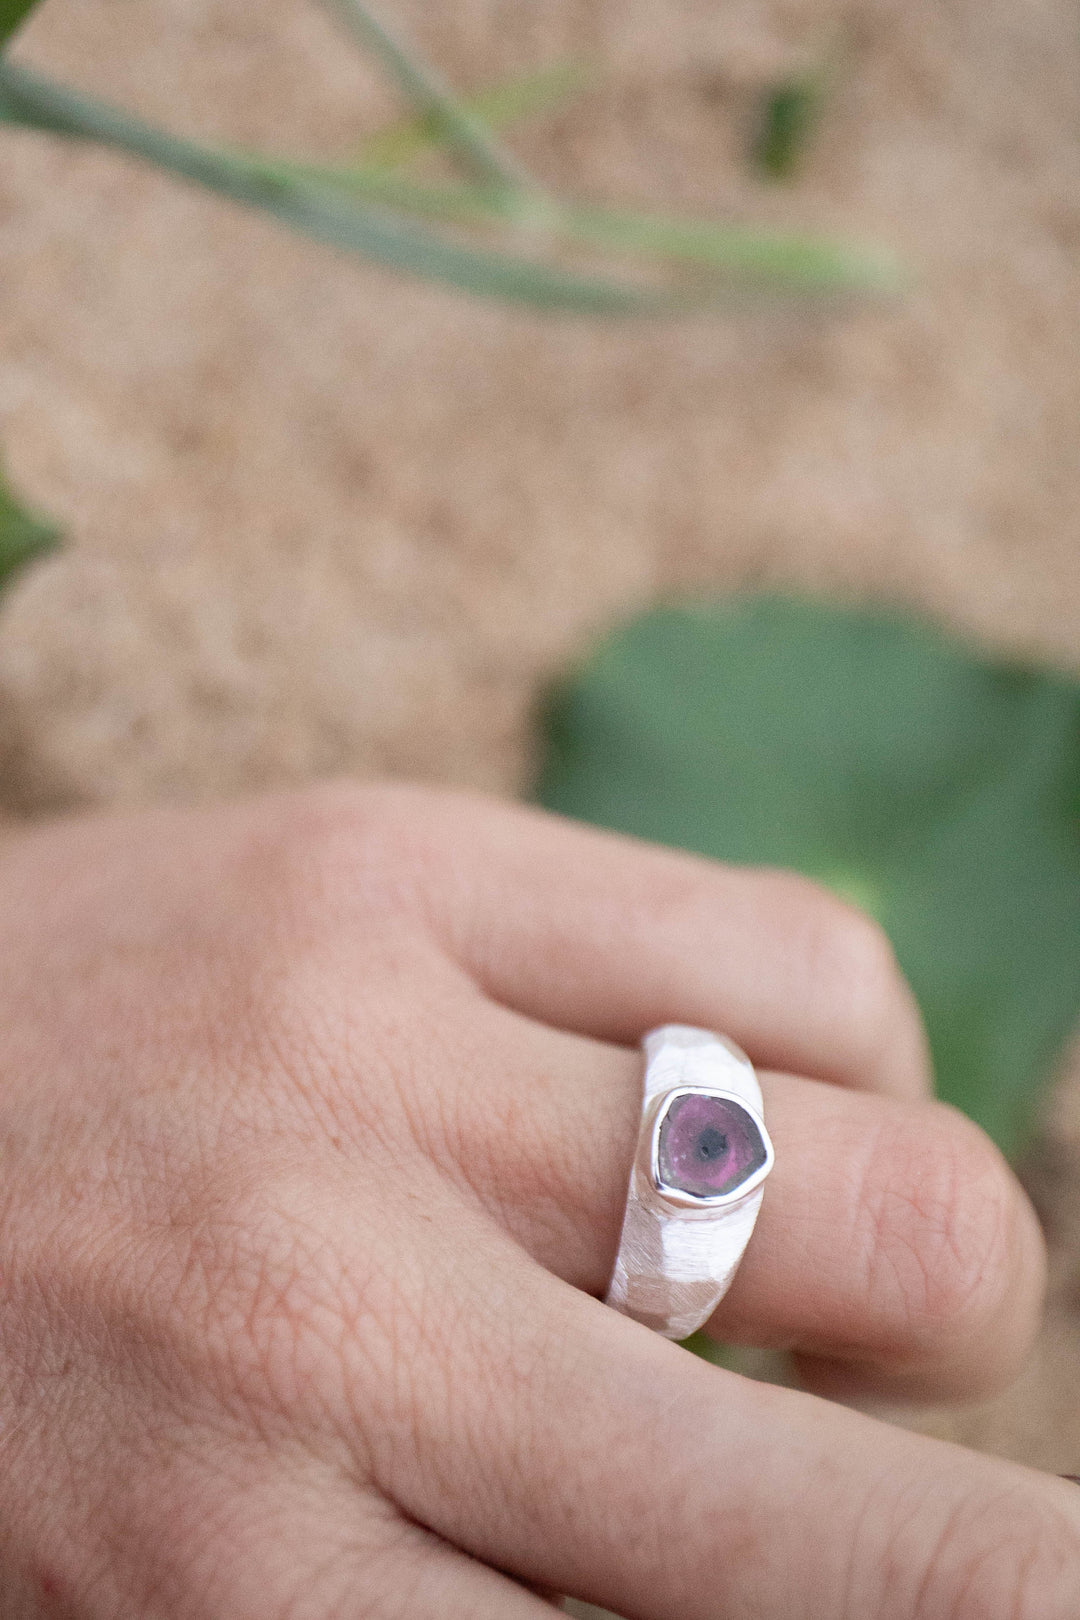 Watermelon Tourmaline Signet Ring in Brushed Sterling Silver - Size 6.5 US